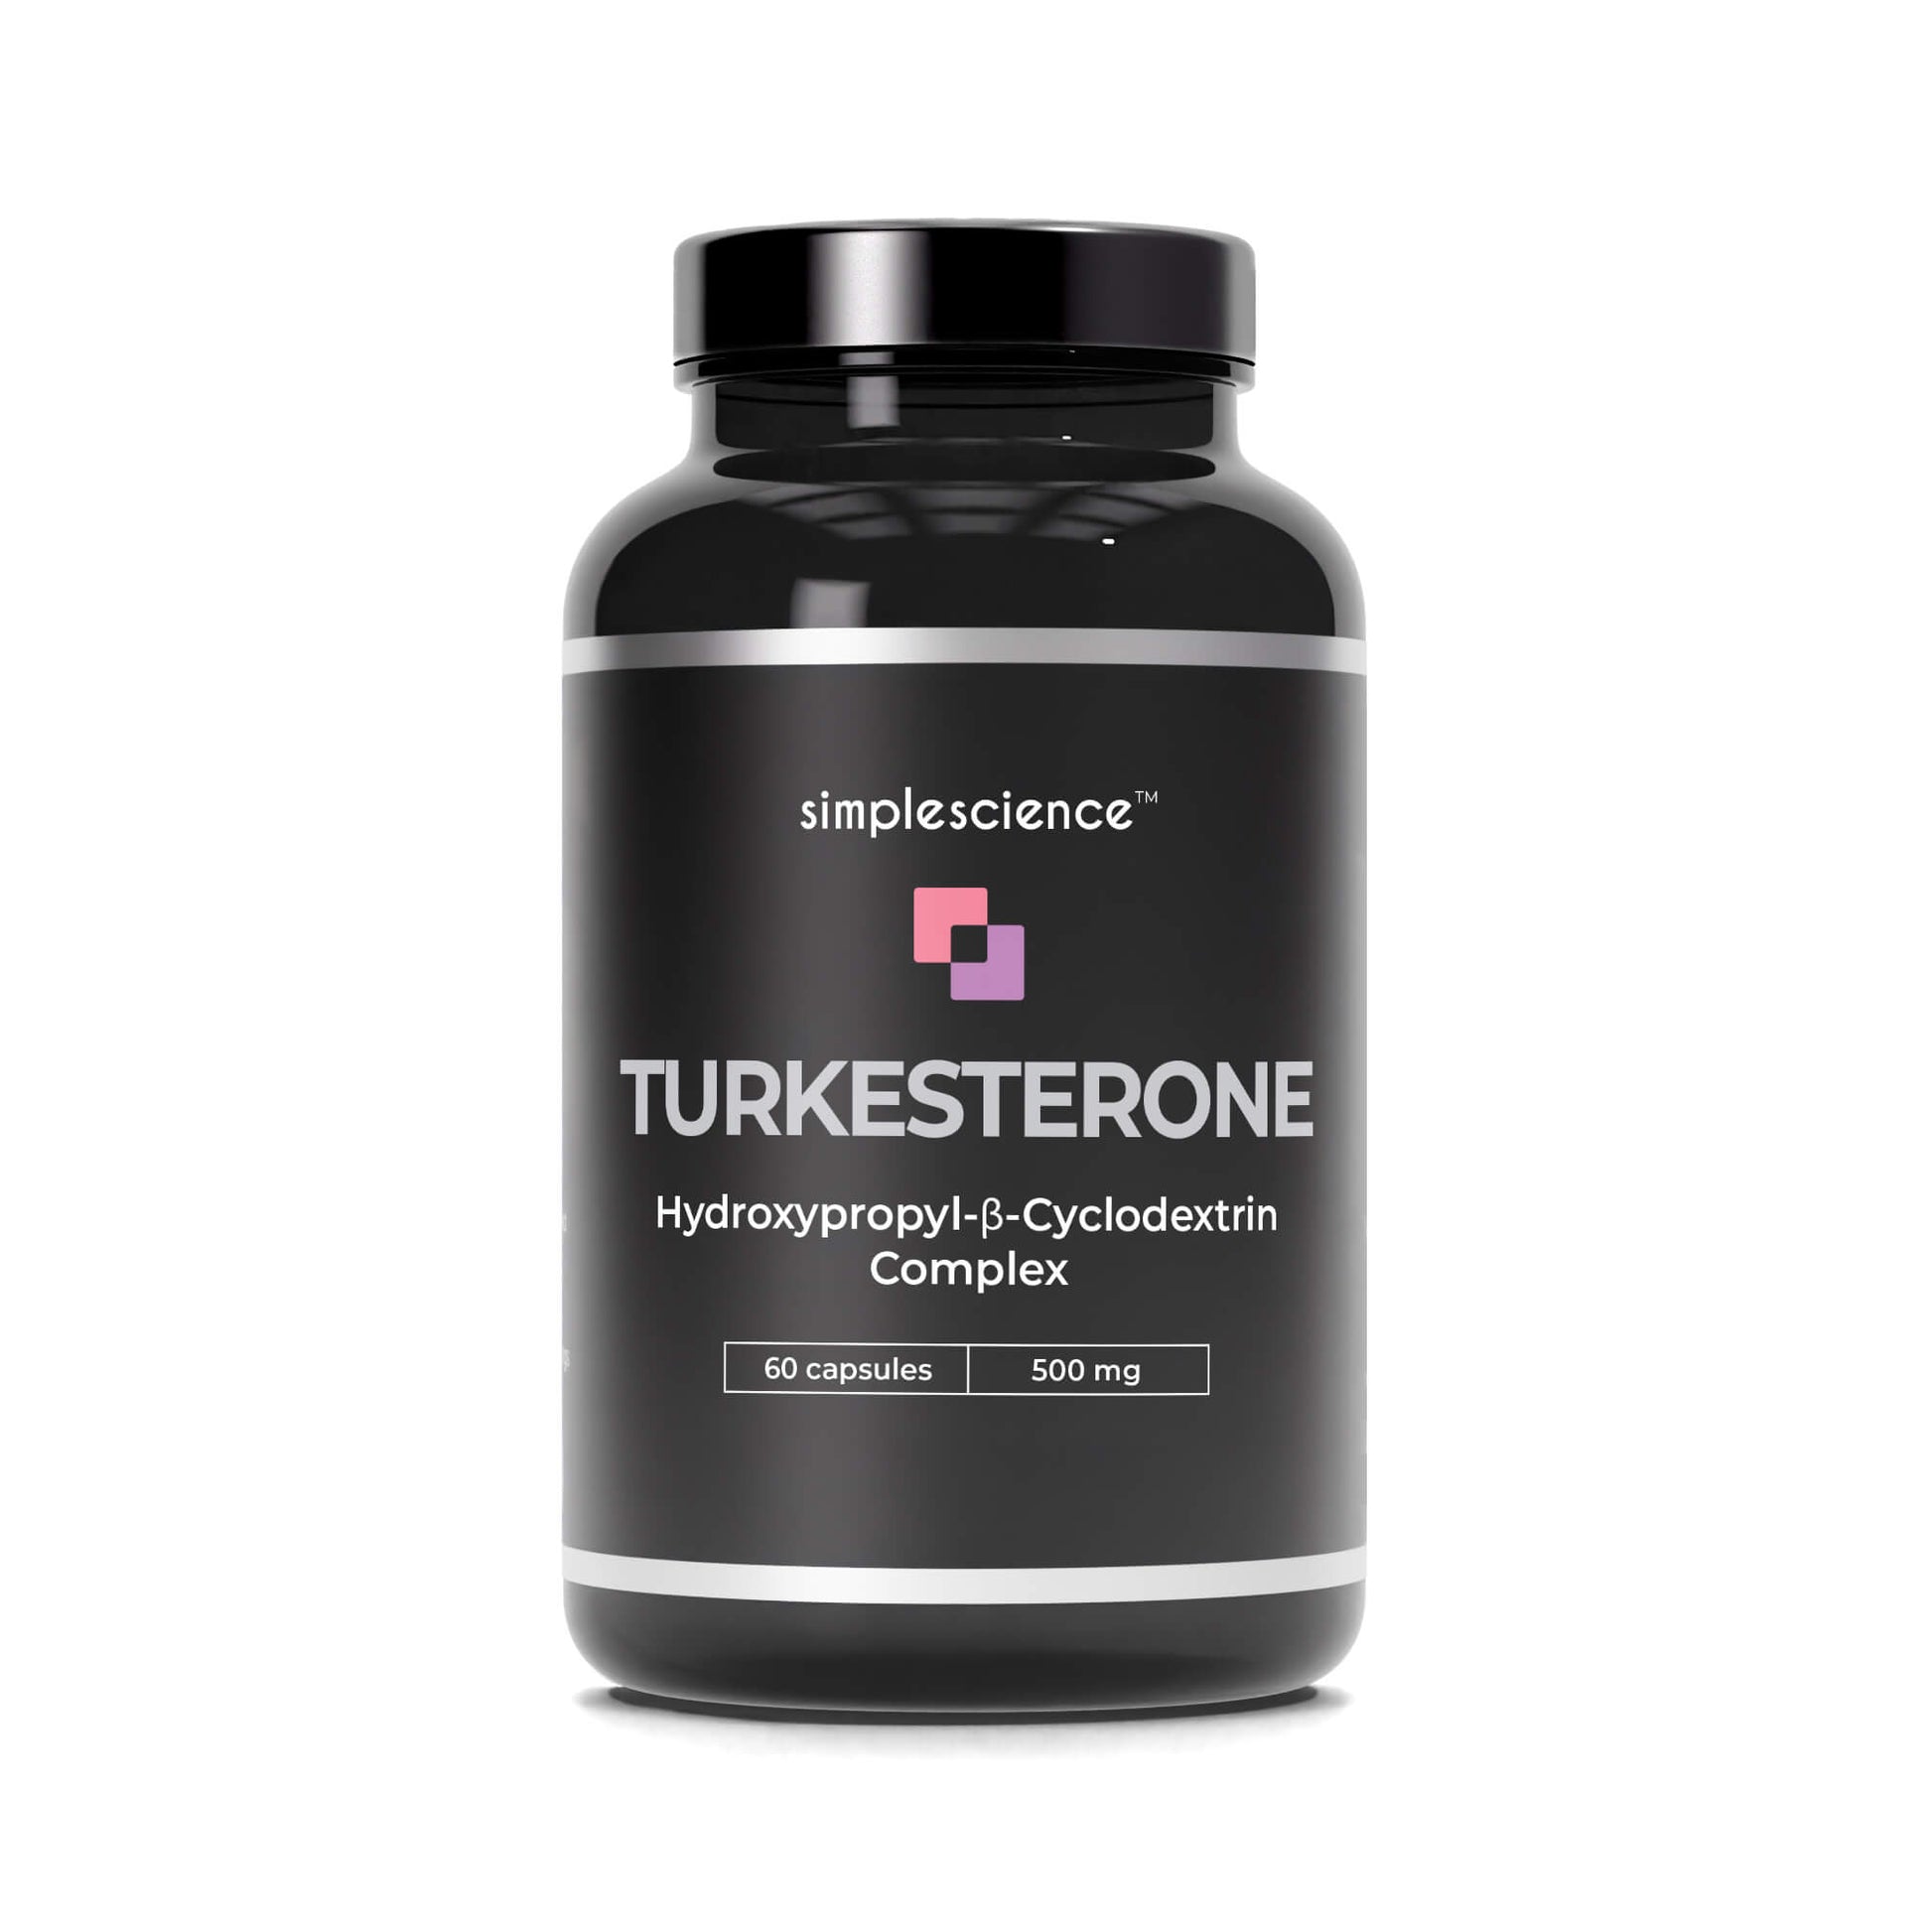 Turkesterone 600mg hydroxypropyl-β-Cyclodextrin complex ajuga turkestanice 20% ecdysteroids. Derek More Plates More Dates best supplement, muscle building testosterone booster. simplescience. 60 capsules